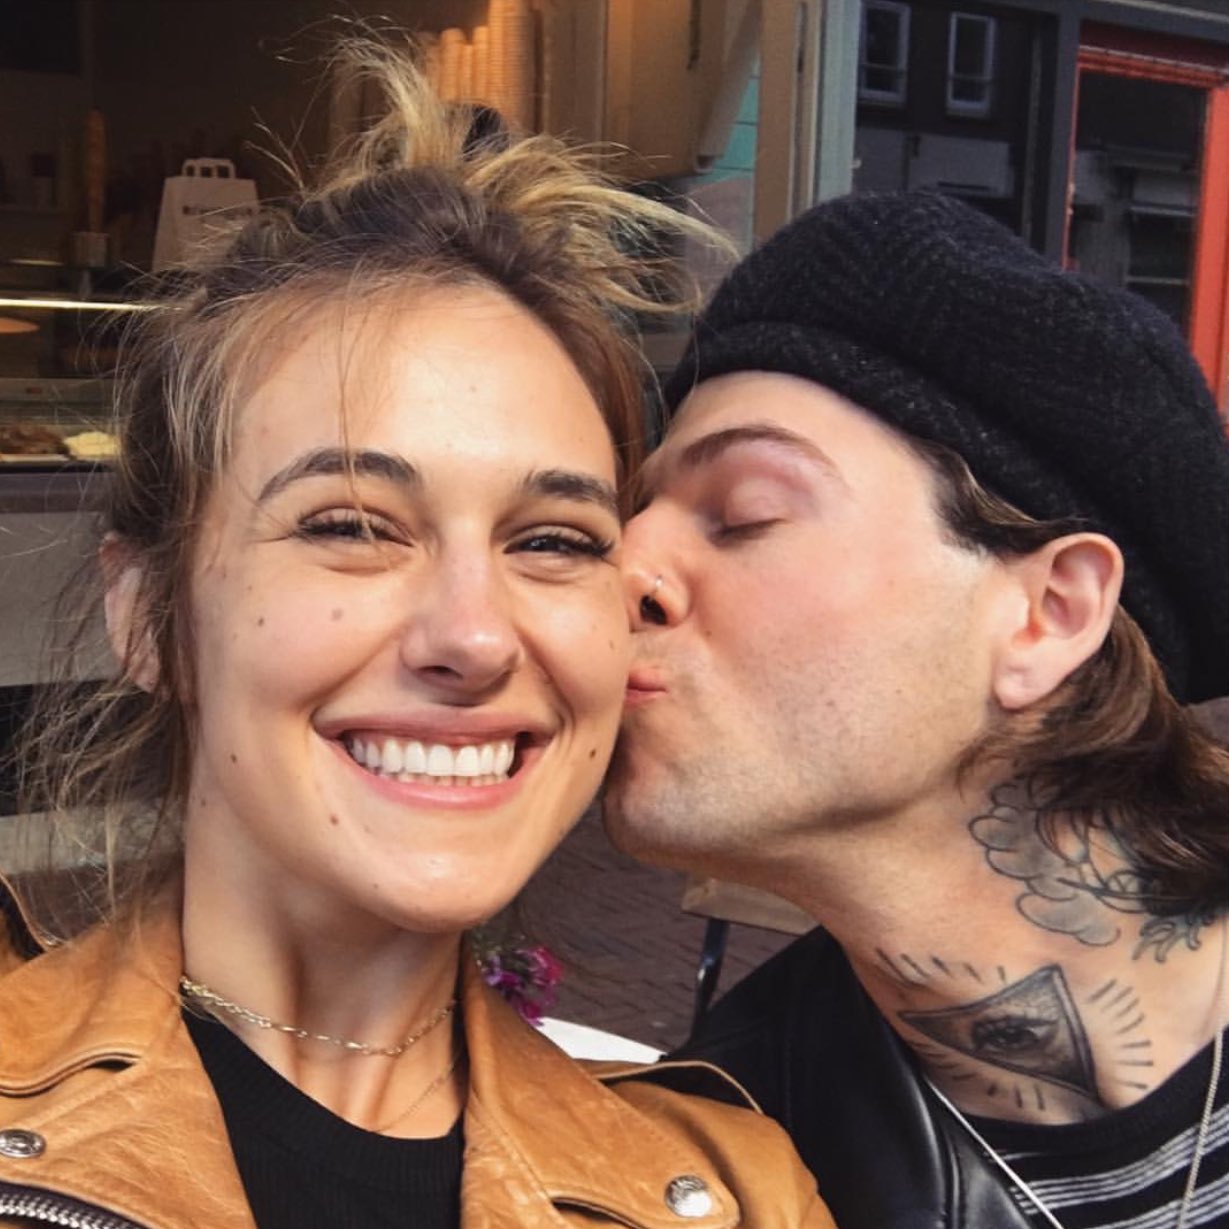 Why Did Jesse Rutherford And Devon Lee Break Up? - The Artistree